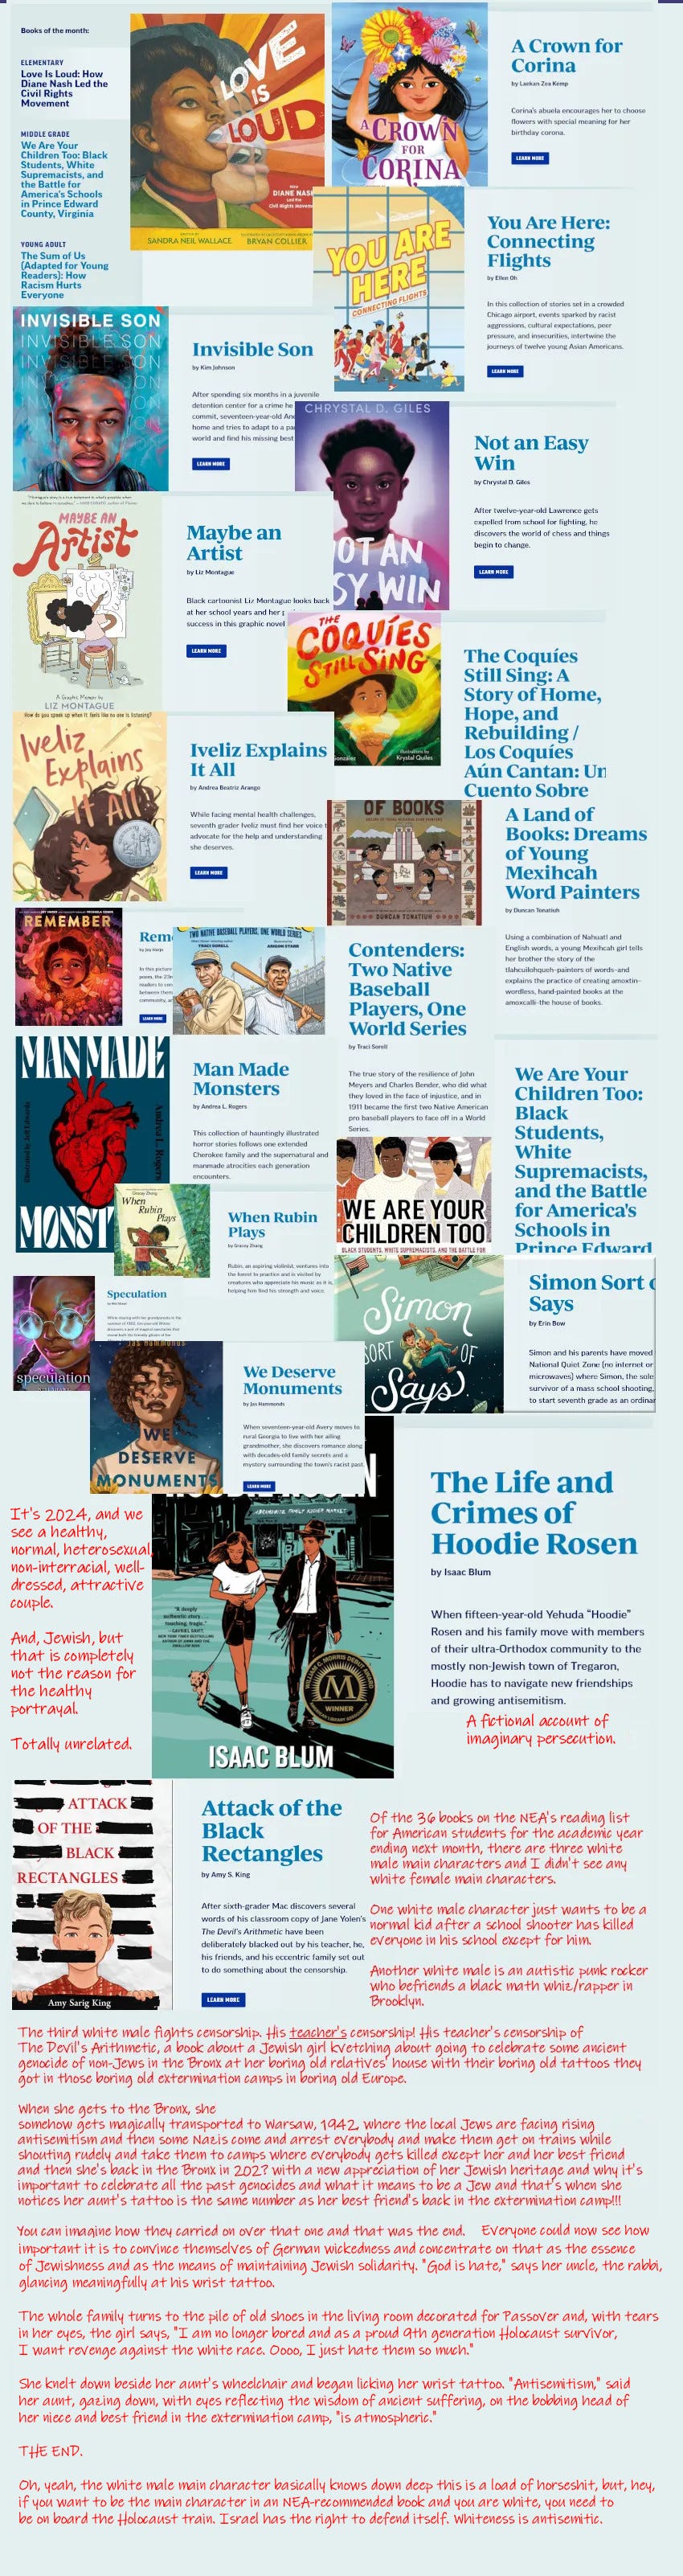 Image displaying the covers of a selection of the NEA's list